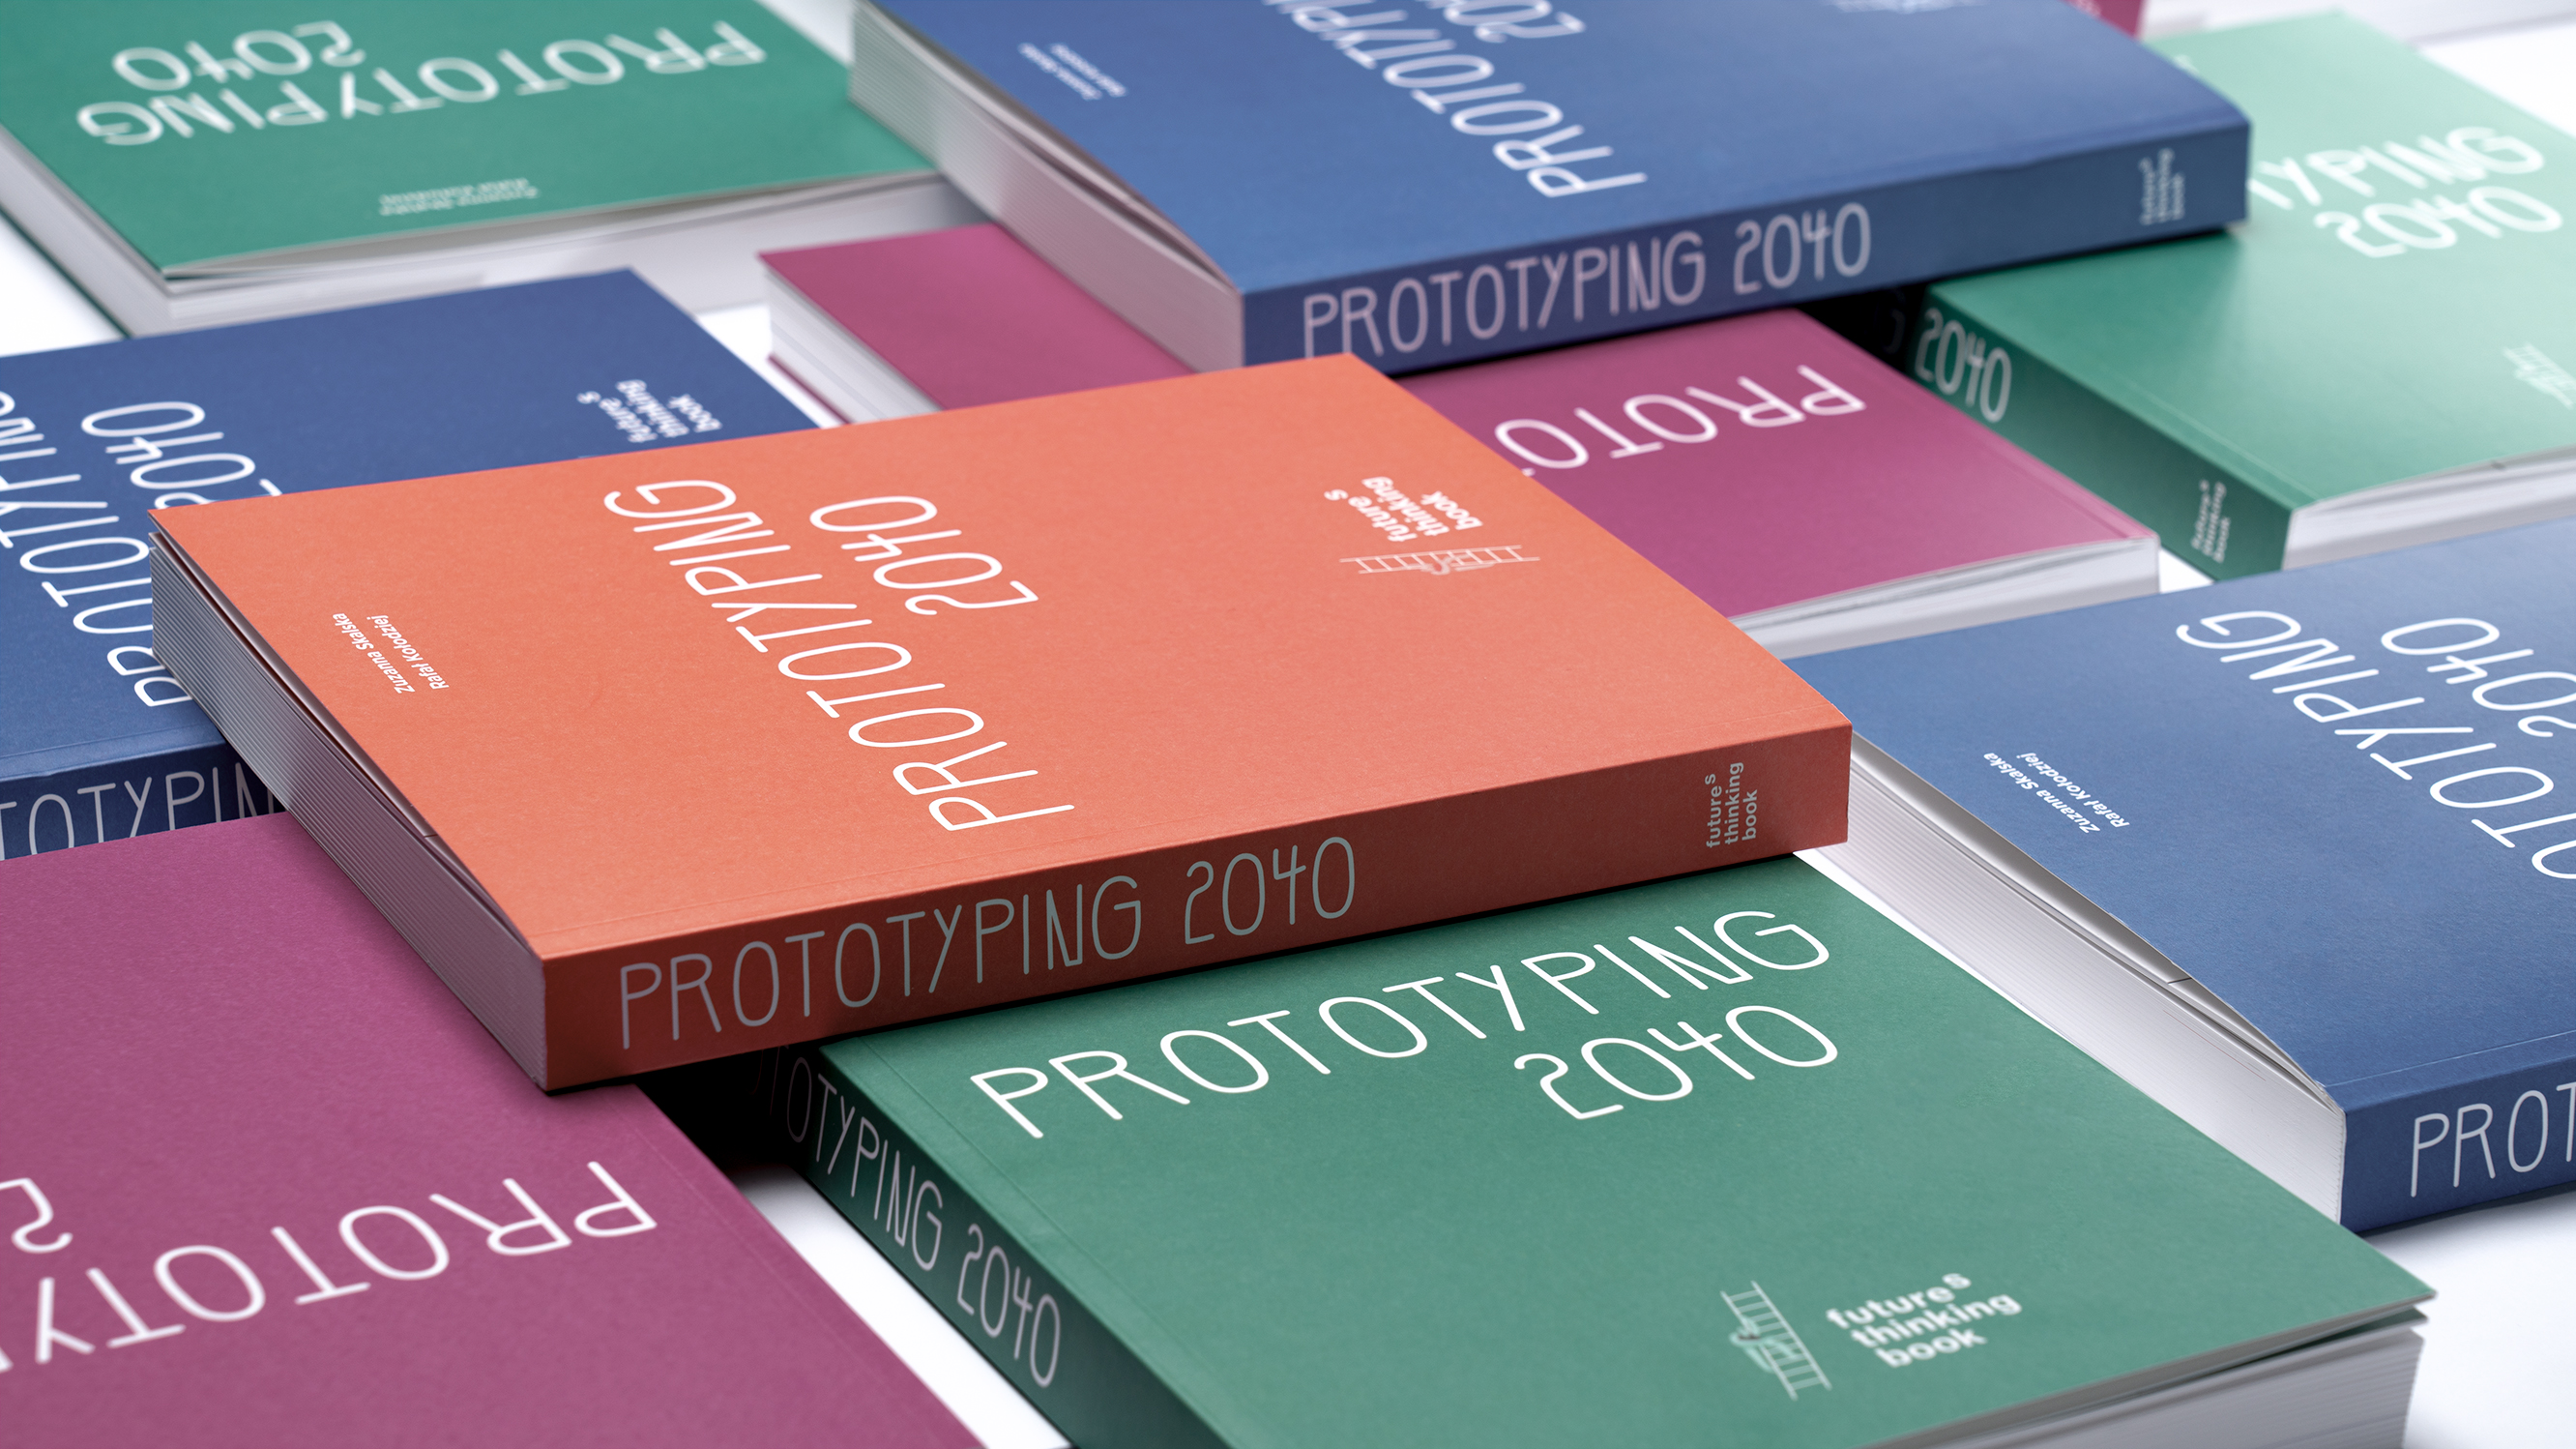 Prototyping 2040  - The FutureS Thinking Book